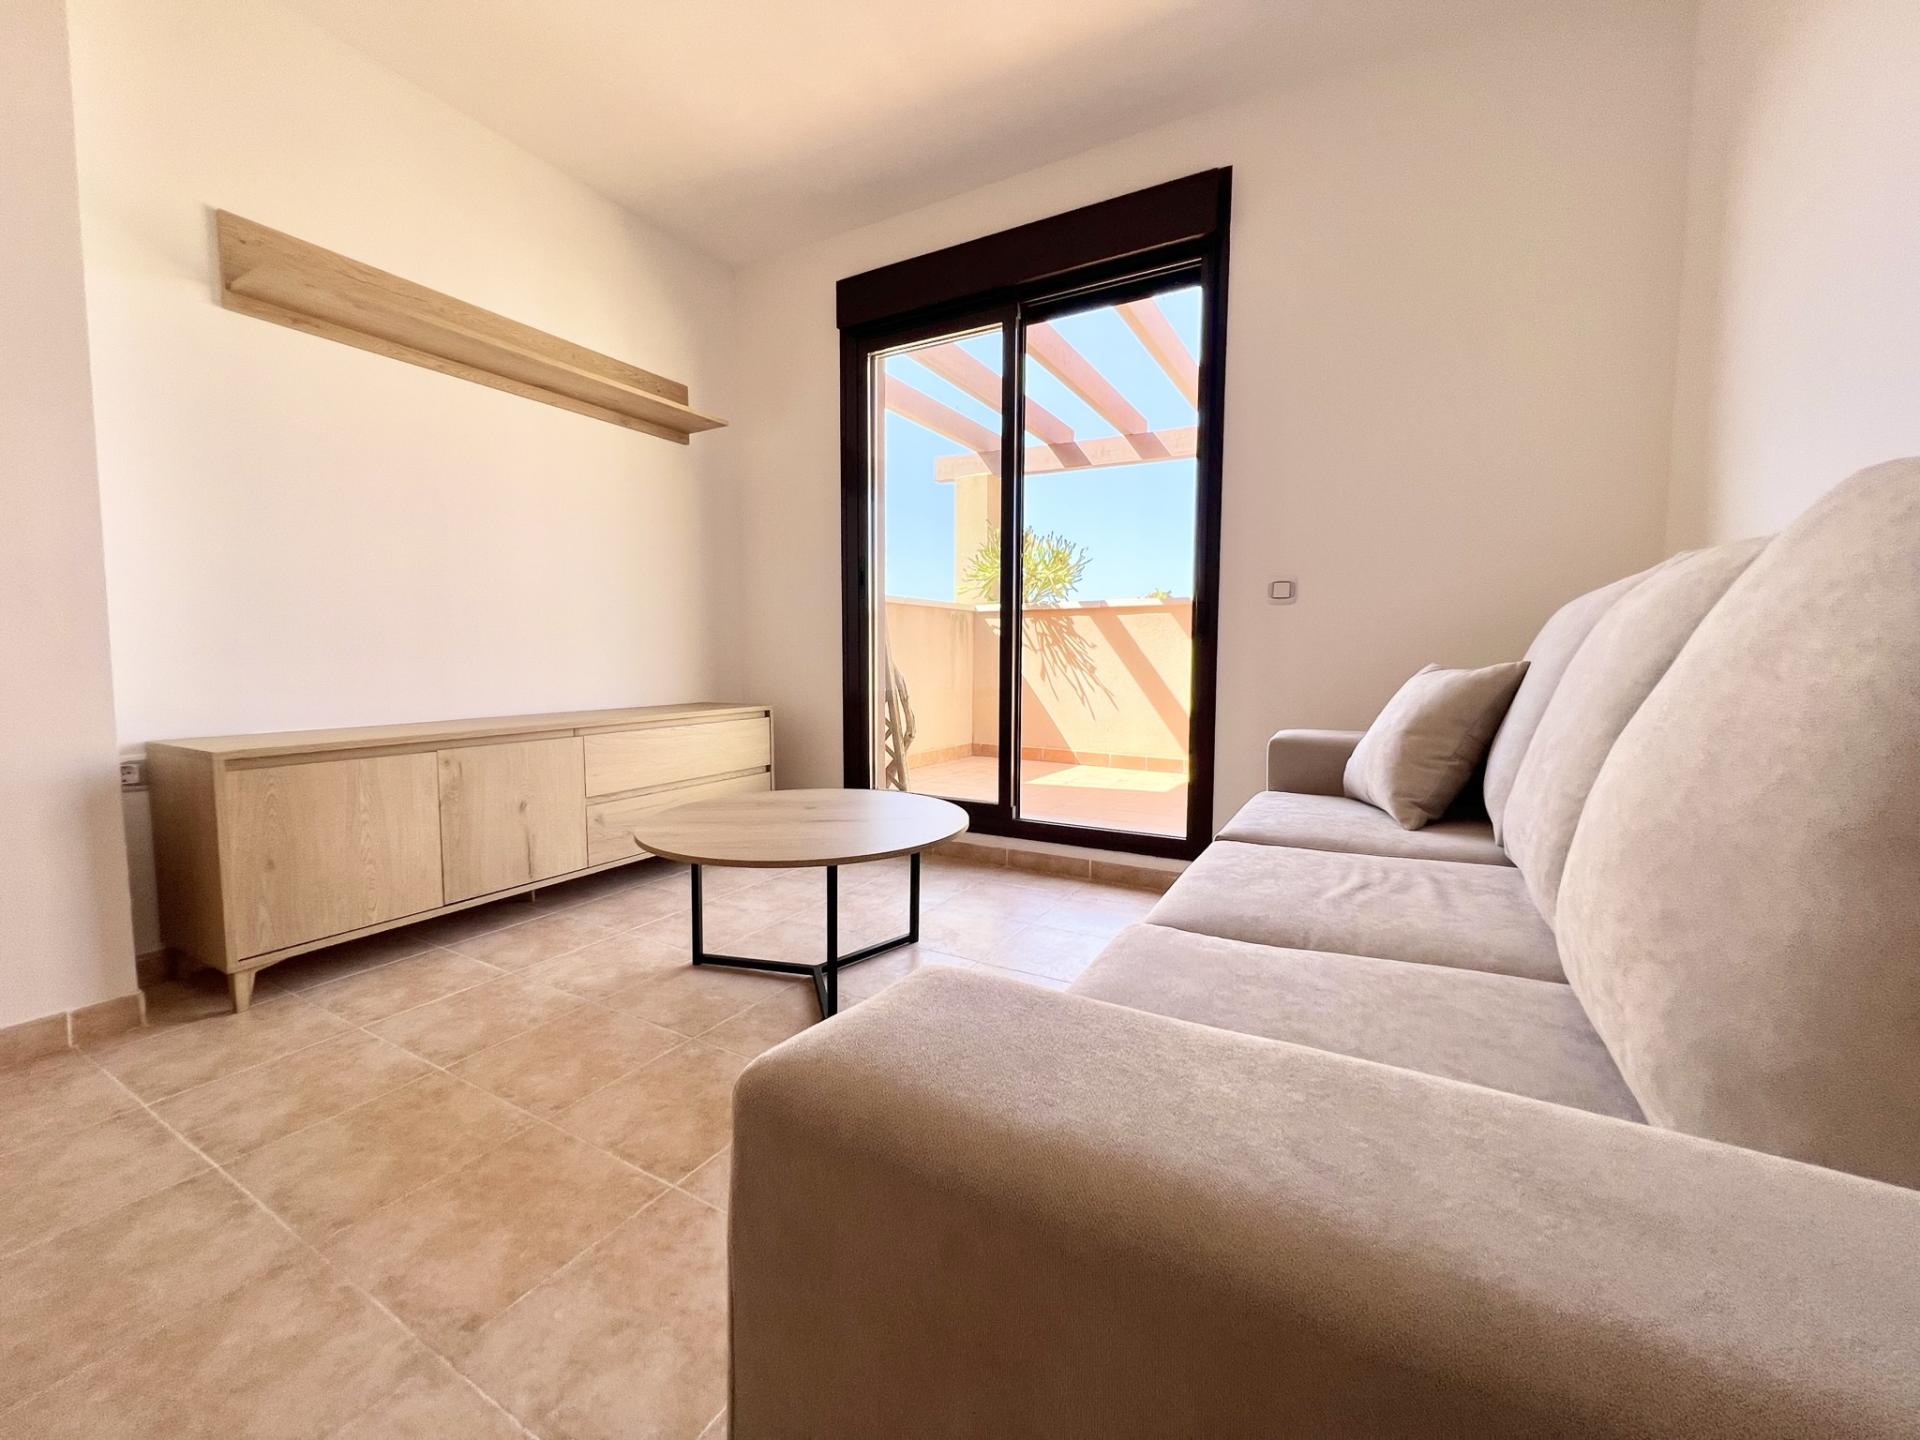 2 bedroom Apartment with terrace in Aguilas - New build in Medvilla Spanje